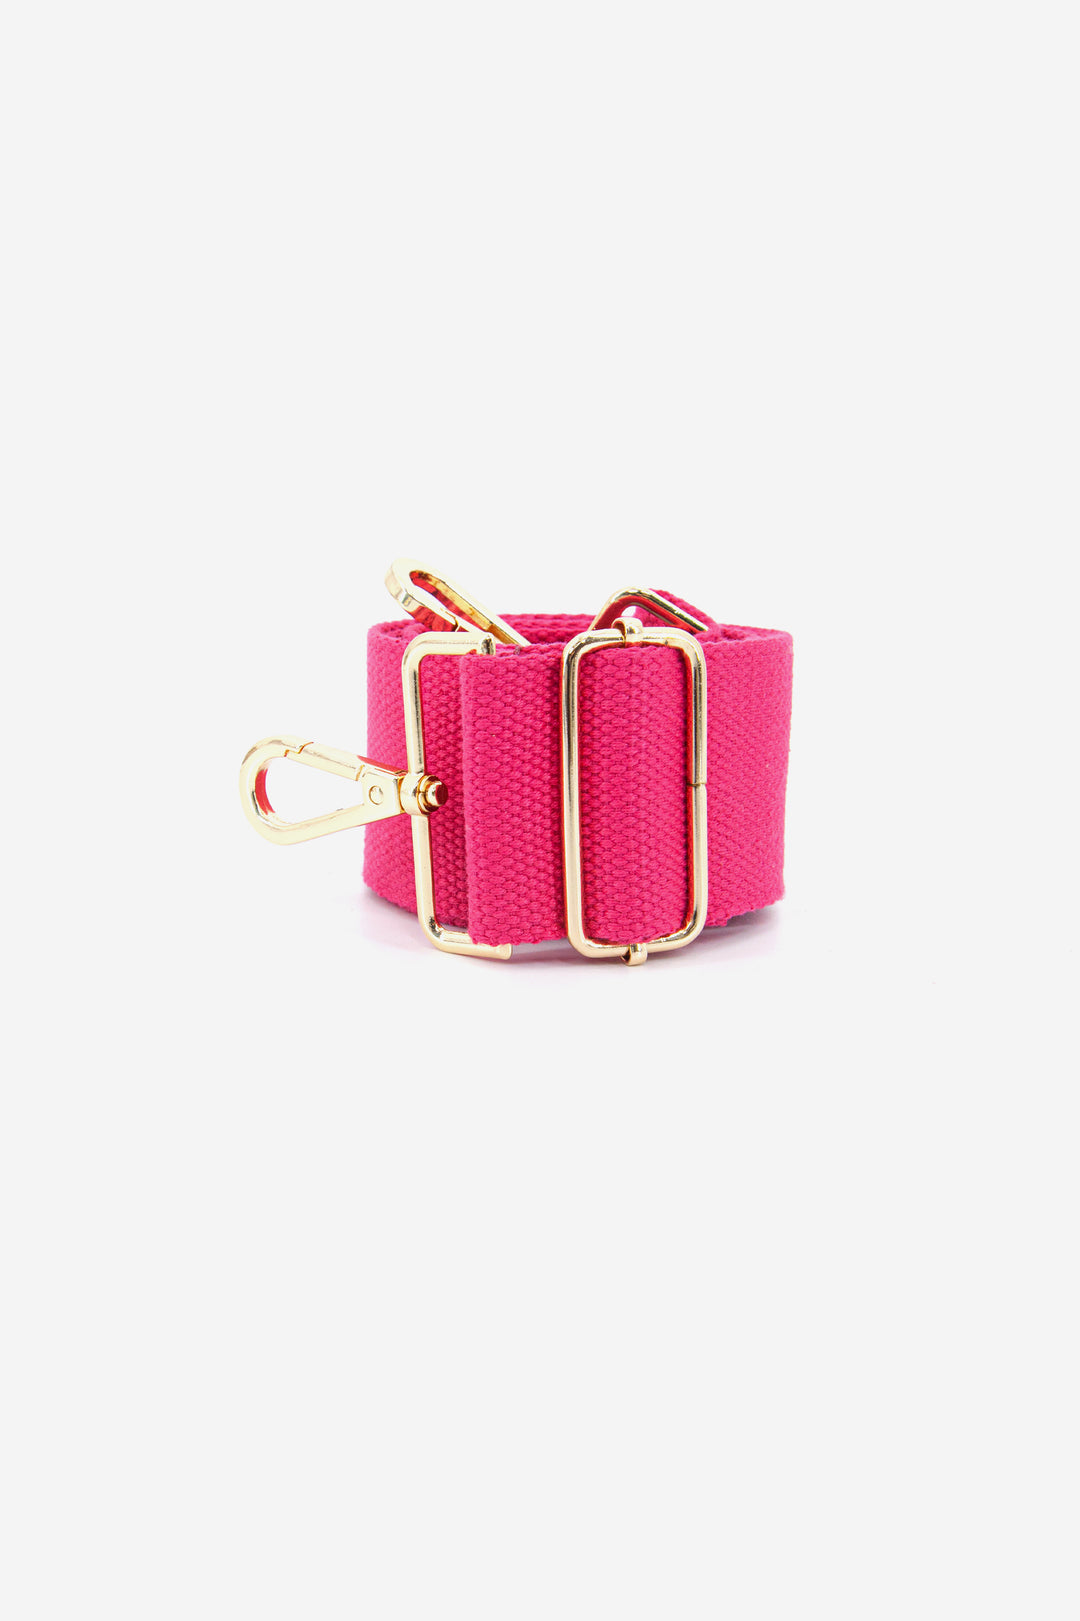 plain fuchsia pink bag strap with a woven texture and gold hardware